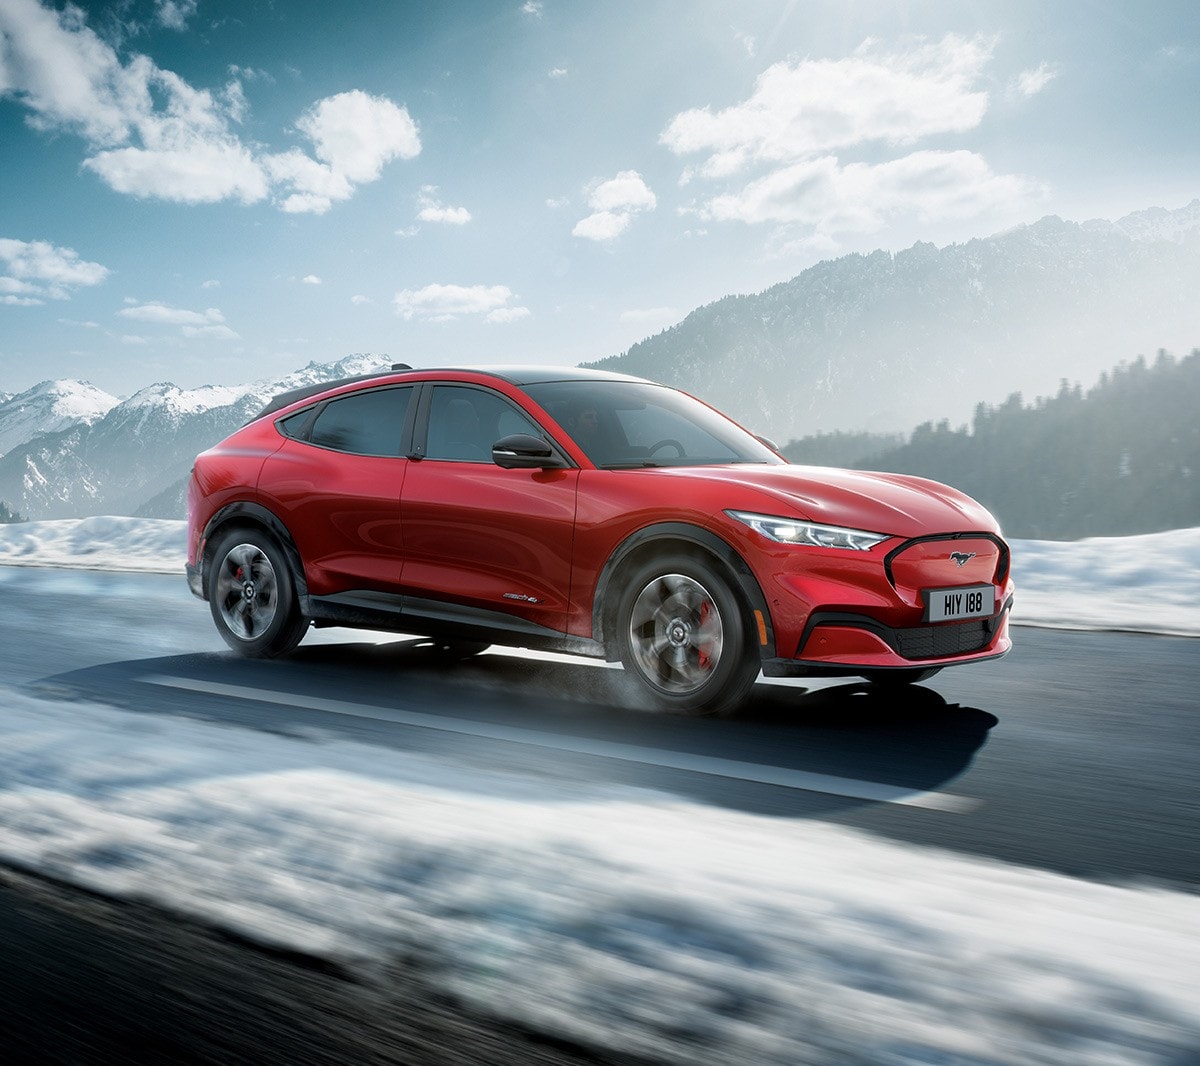 All-New Ford Mustang Mach-E driving through snowy mountains